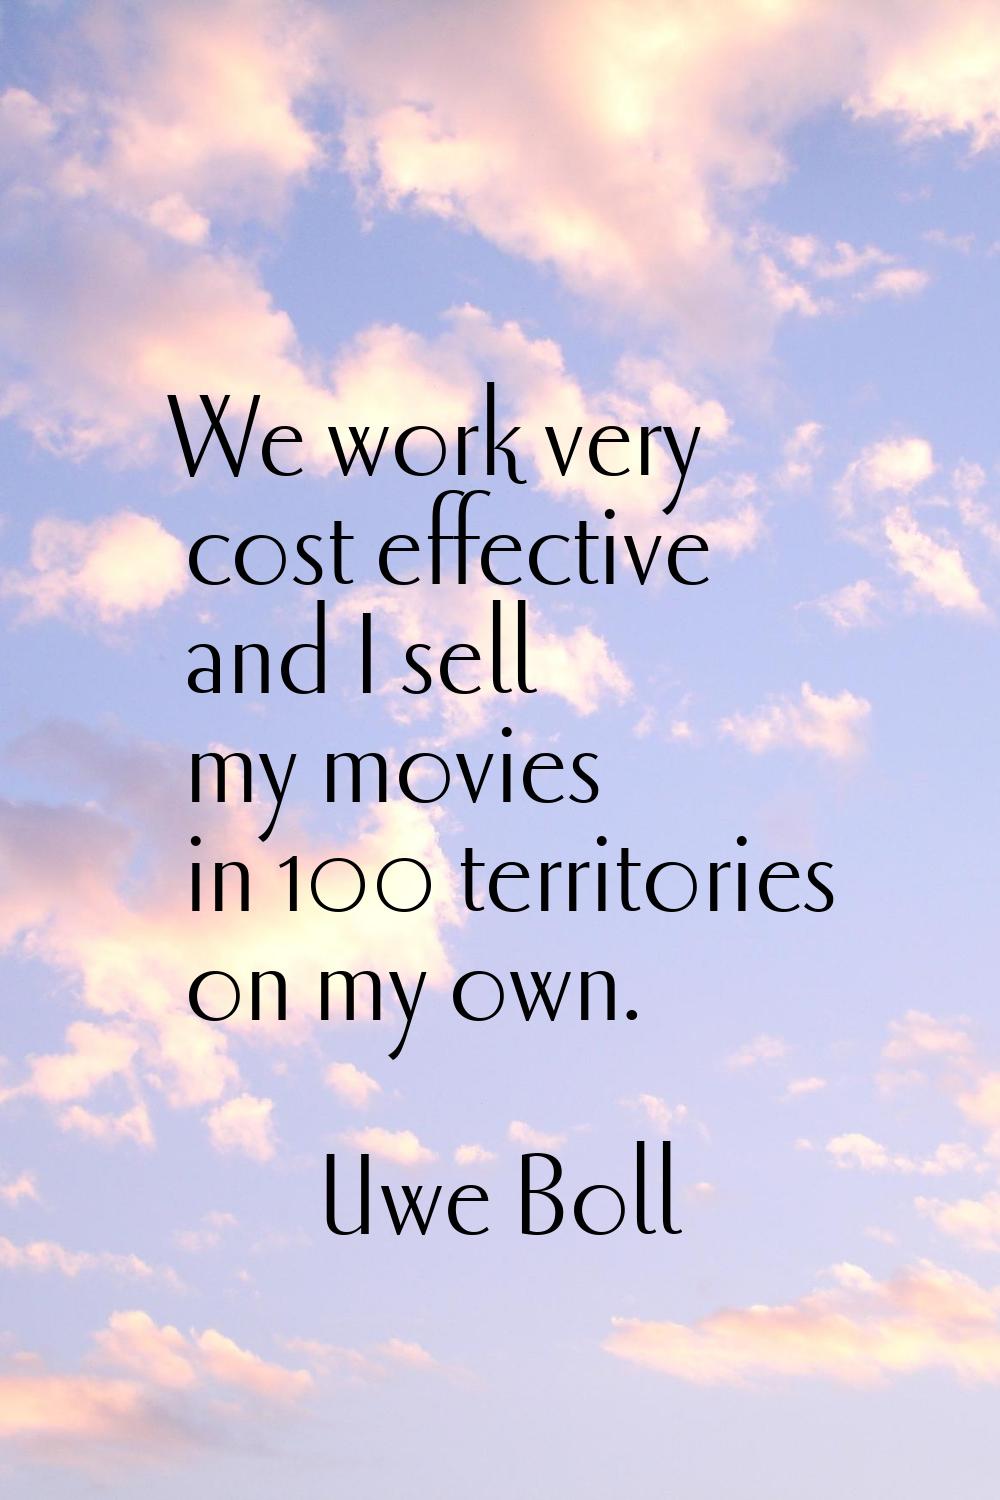 We work very cost effective and I sell my movies in 100 territories on my own.